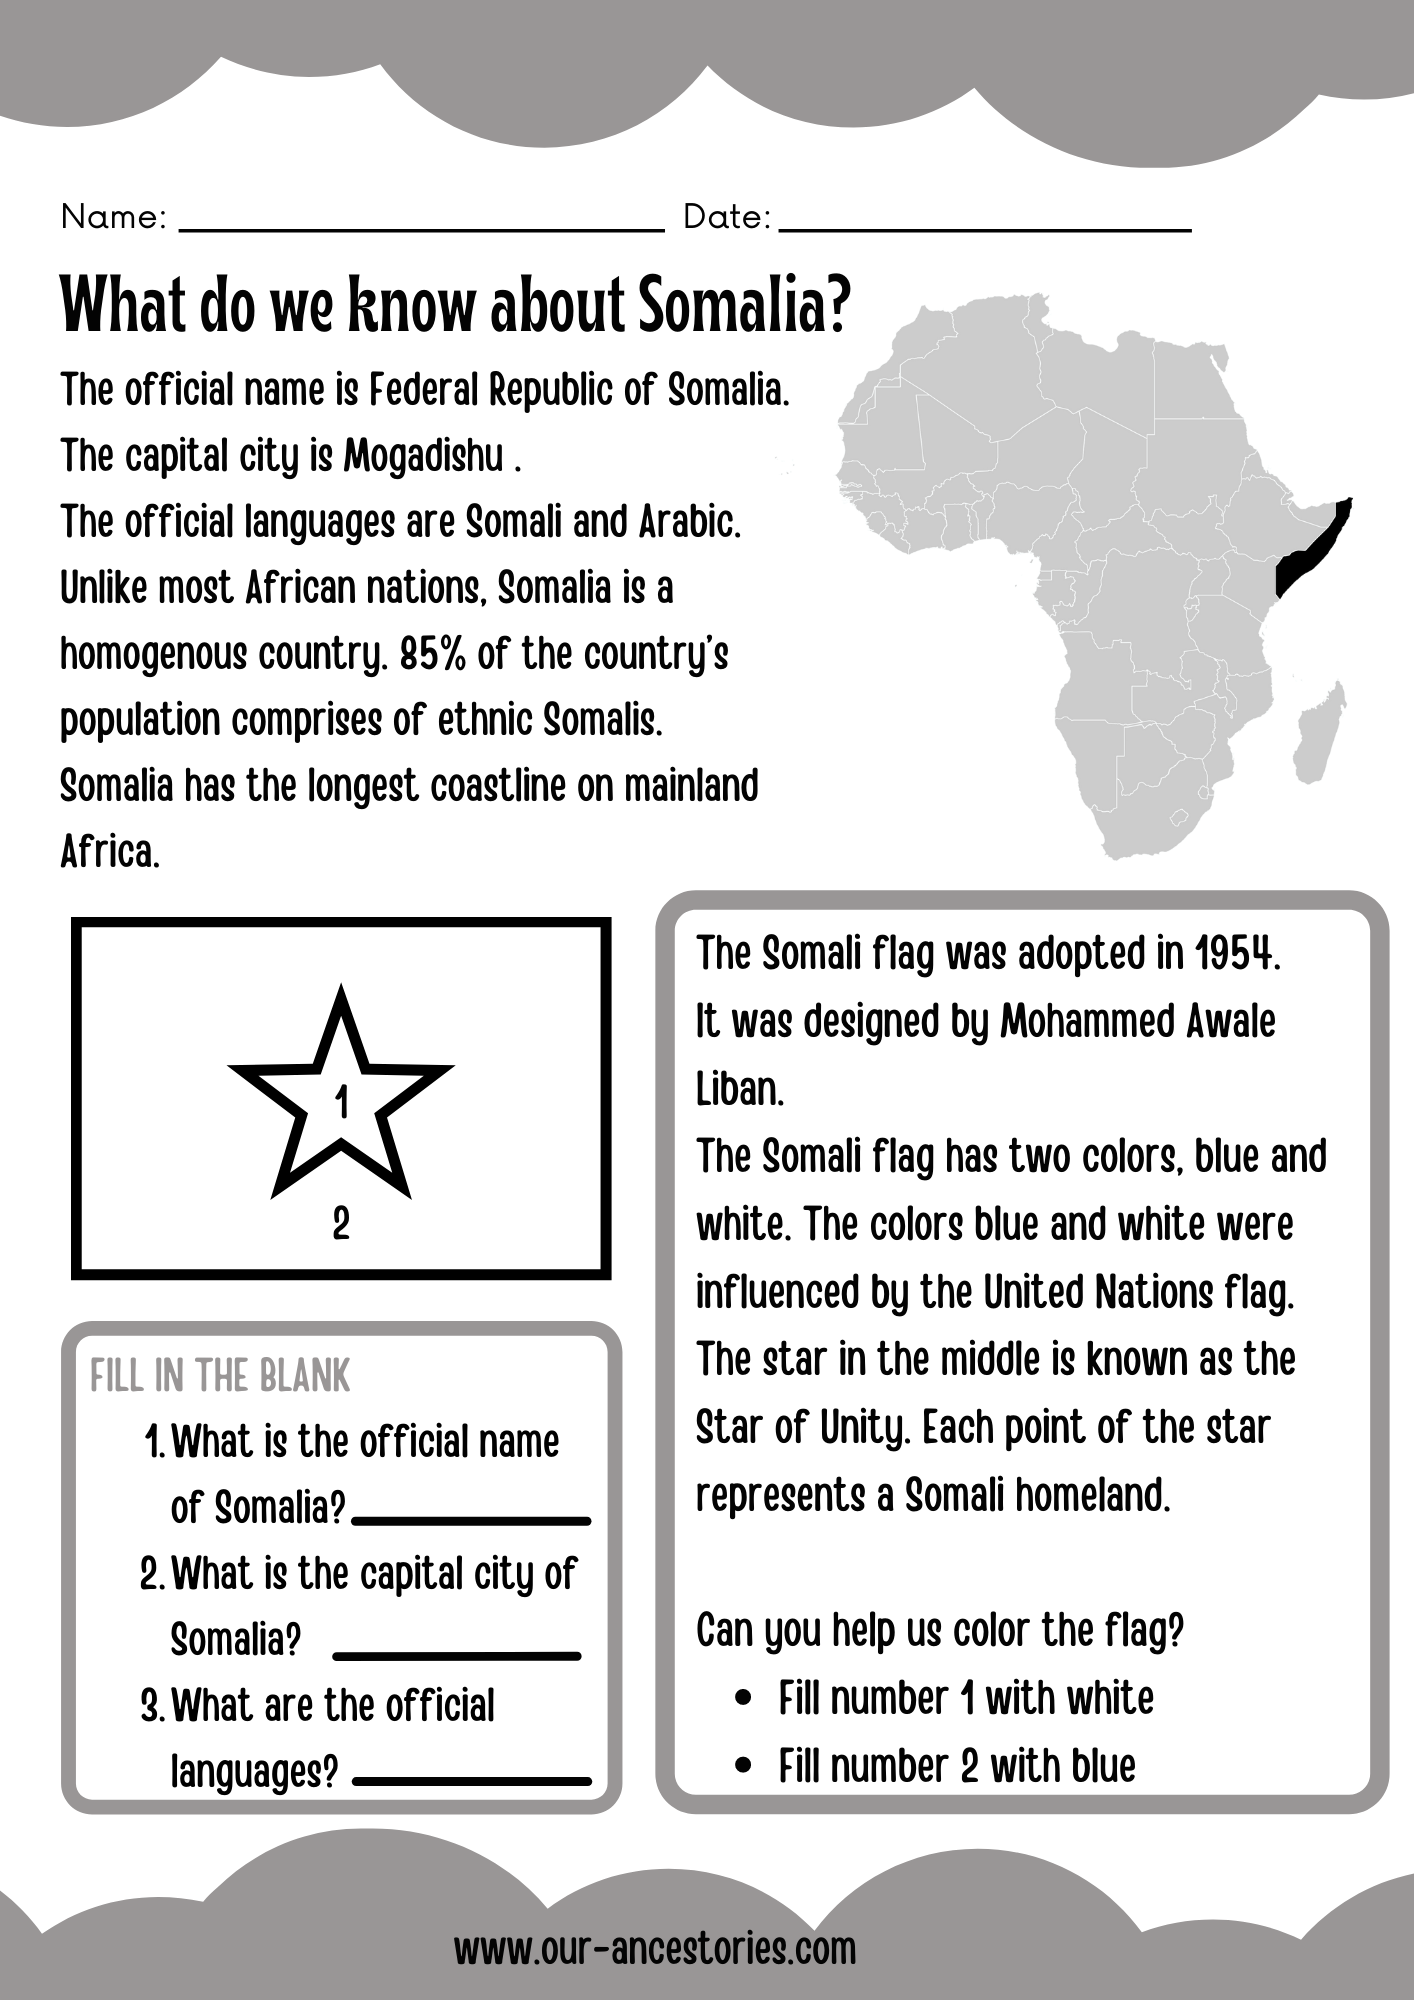 Our Ancestories - Somalia Country Profile - Free Worksheets